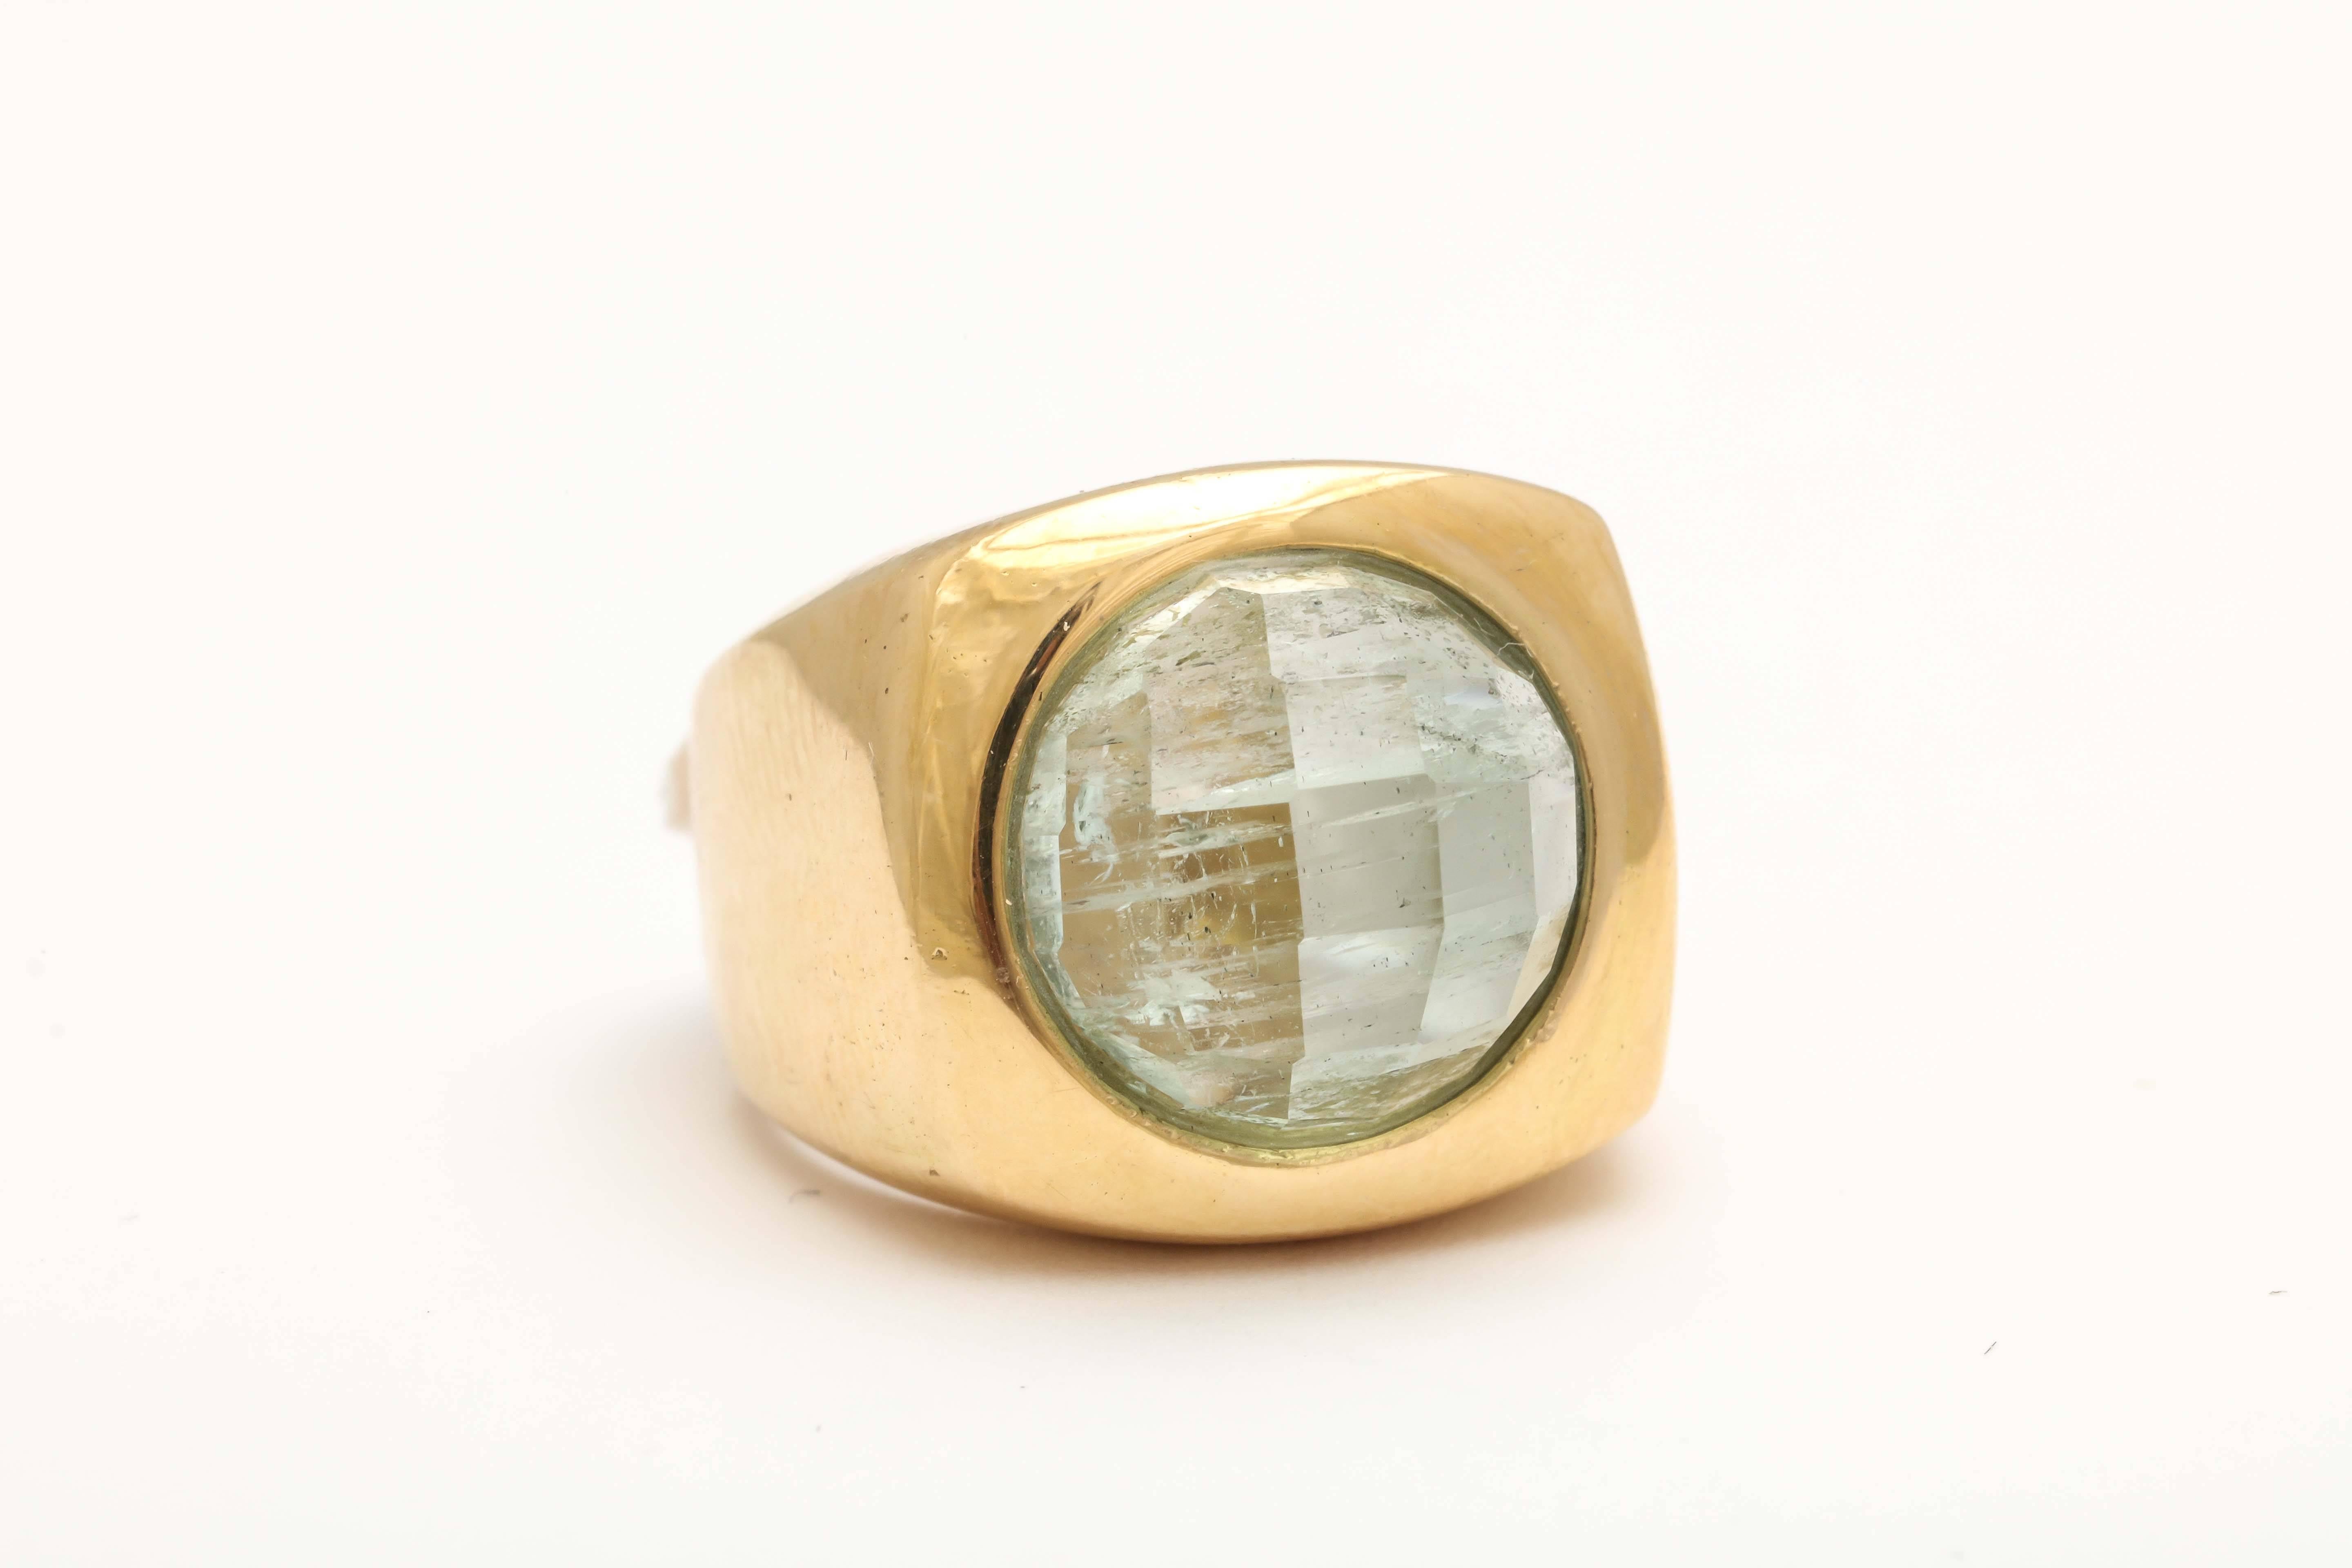 A fabulous designer ring in 18 kt gold with a interesting faceted aqua in a modernist setting. This is a classical look but exceptional design.